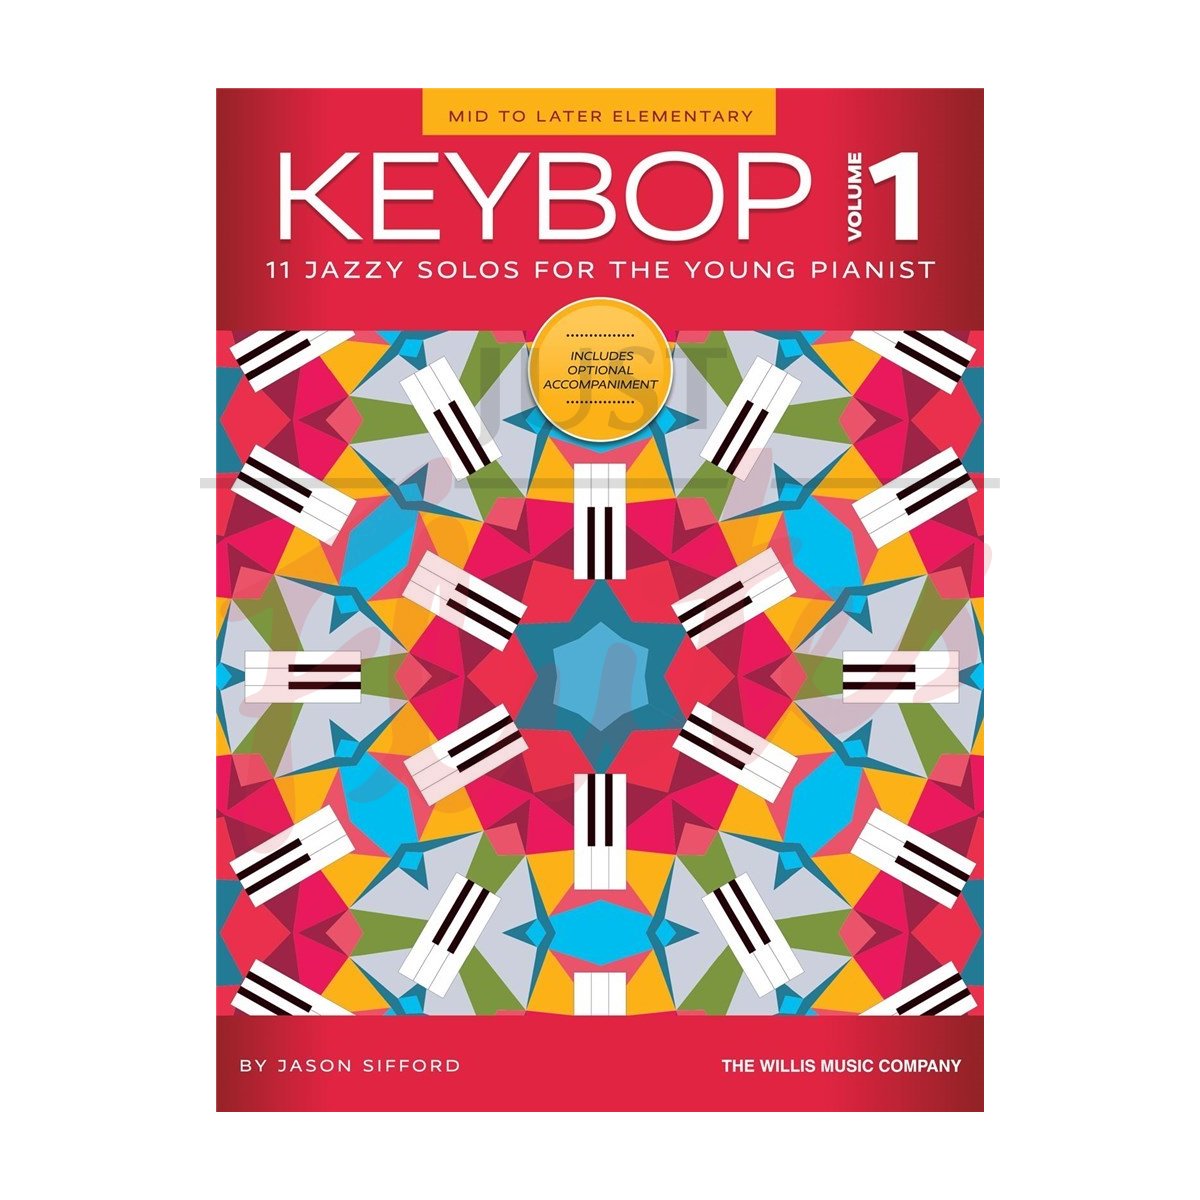 Keybop Volume 1: 11 Jazzy Solos for the Young Pianist